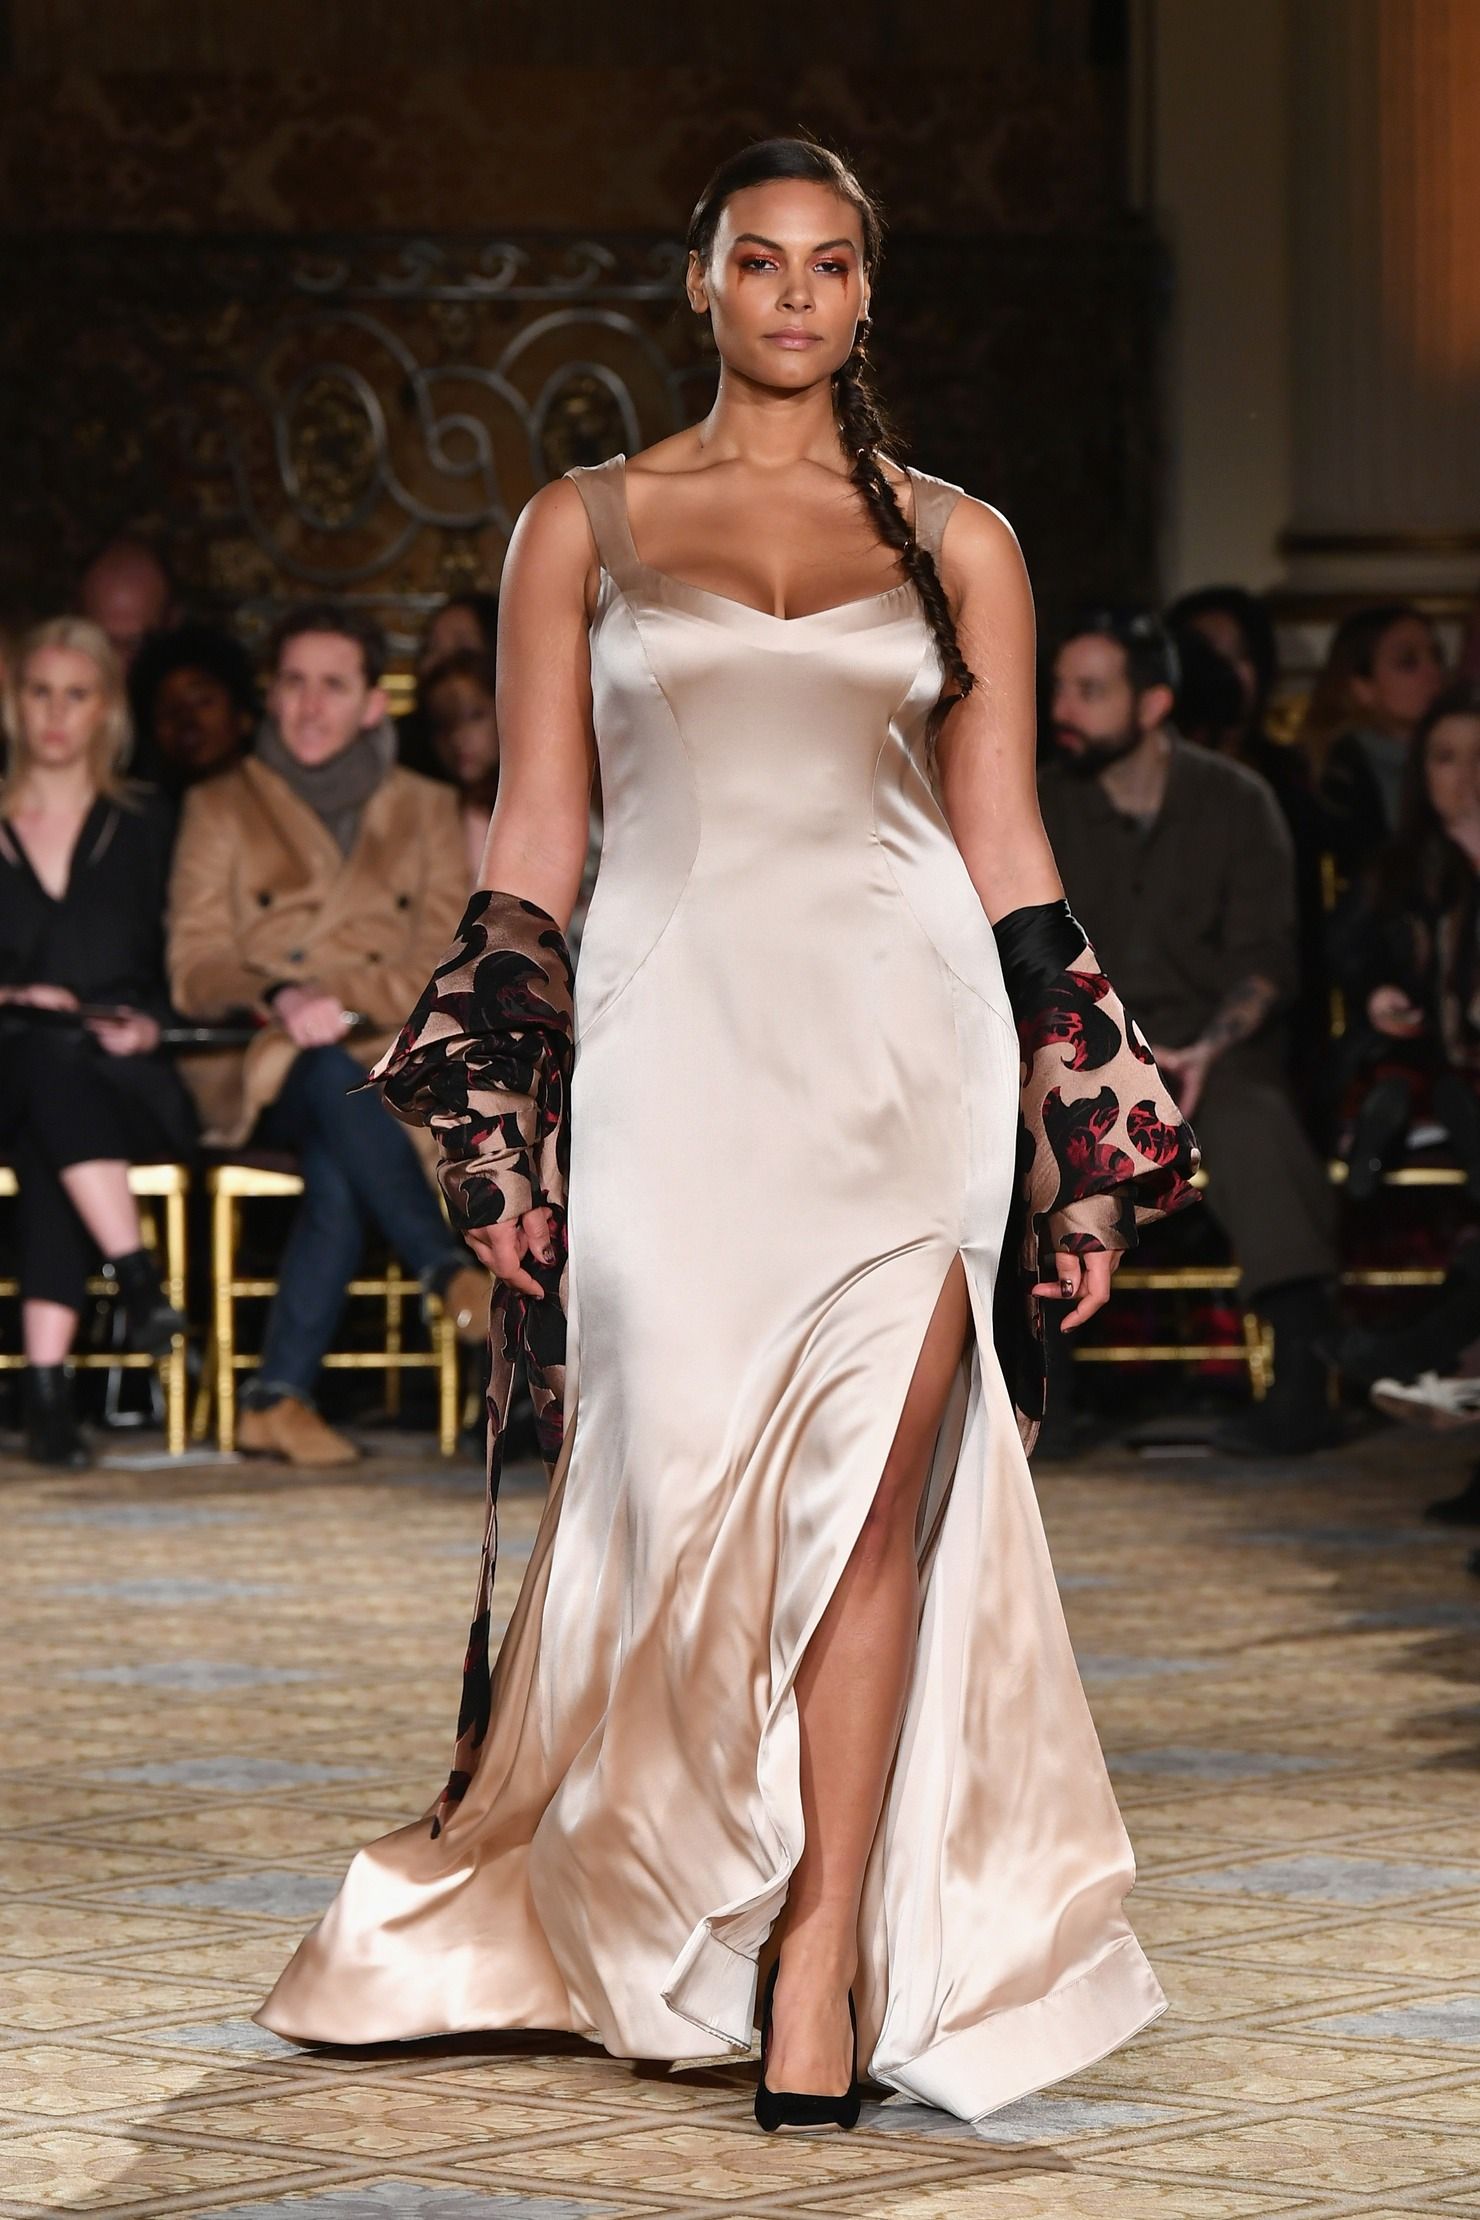 Christian Siriano's NYFW Show Featured 10 Plus Size Models — PHOTOS